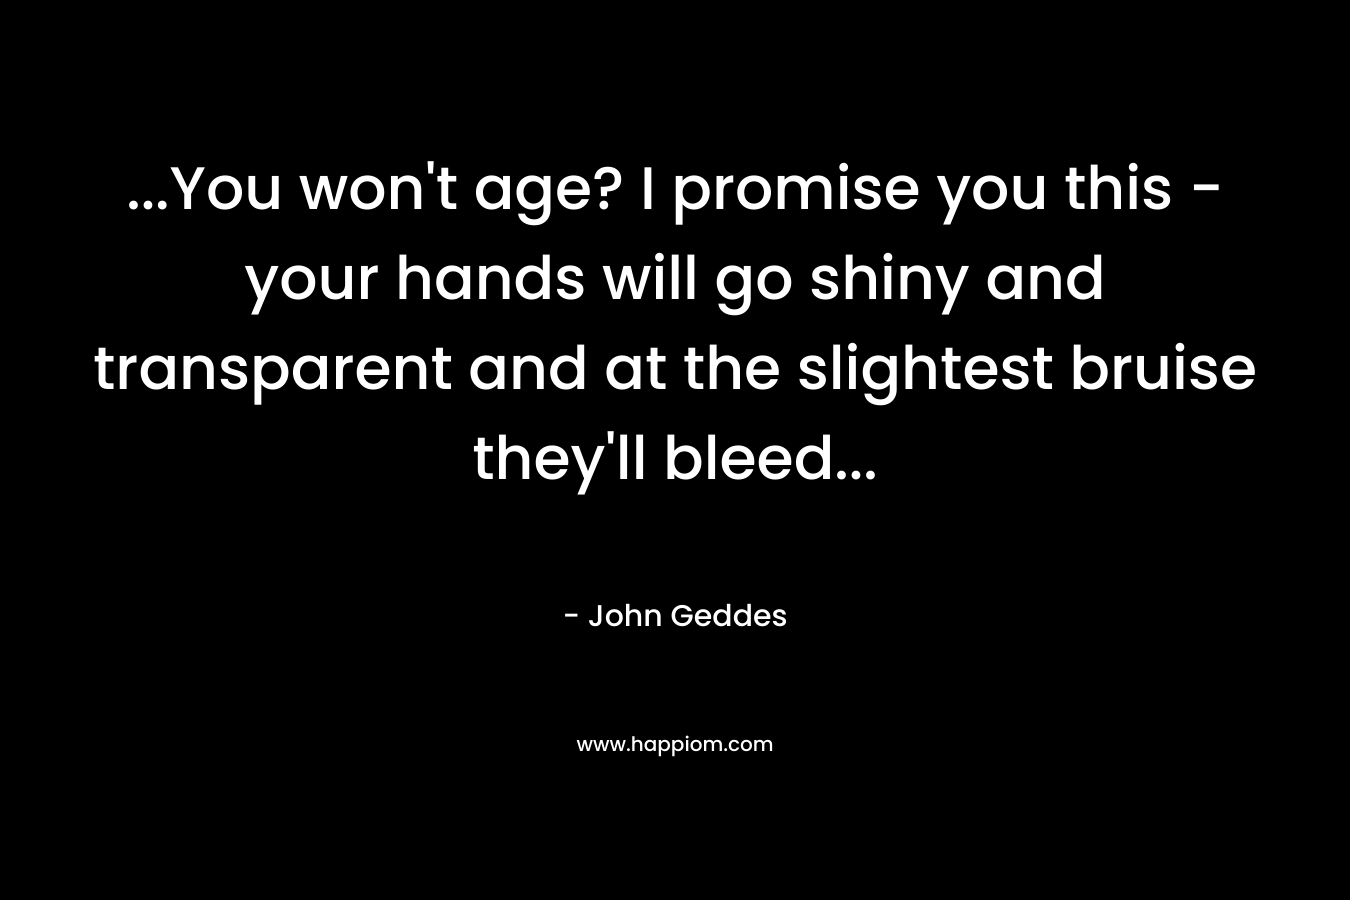 ...You won't age? I promise you this - your hands will go shiny and transparent and at the slightest bruise they'll bleed...